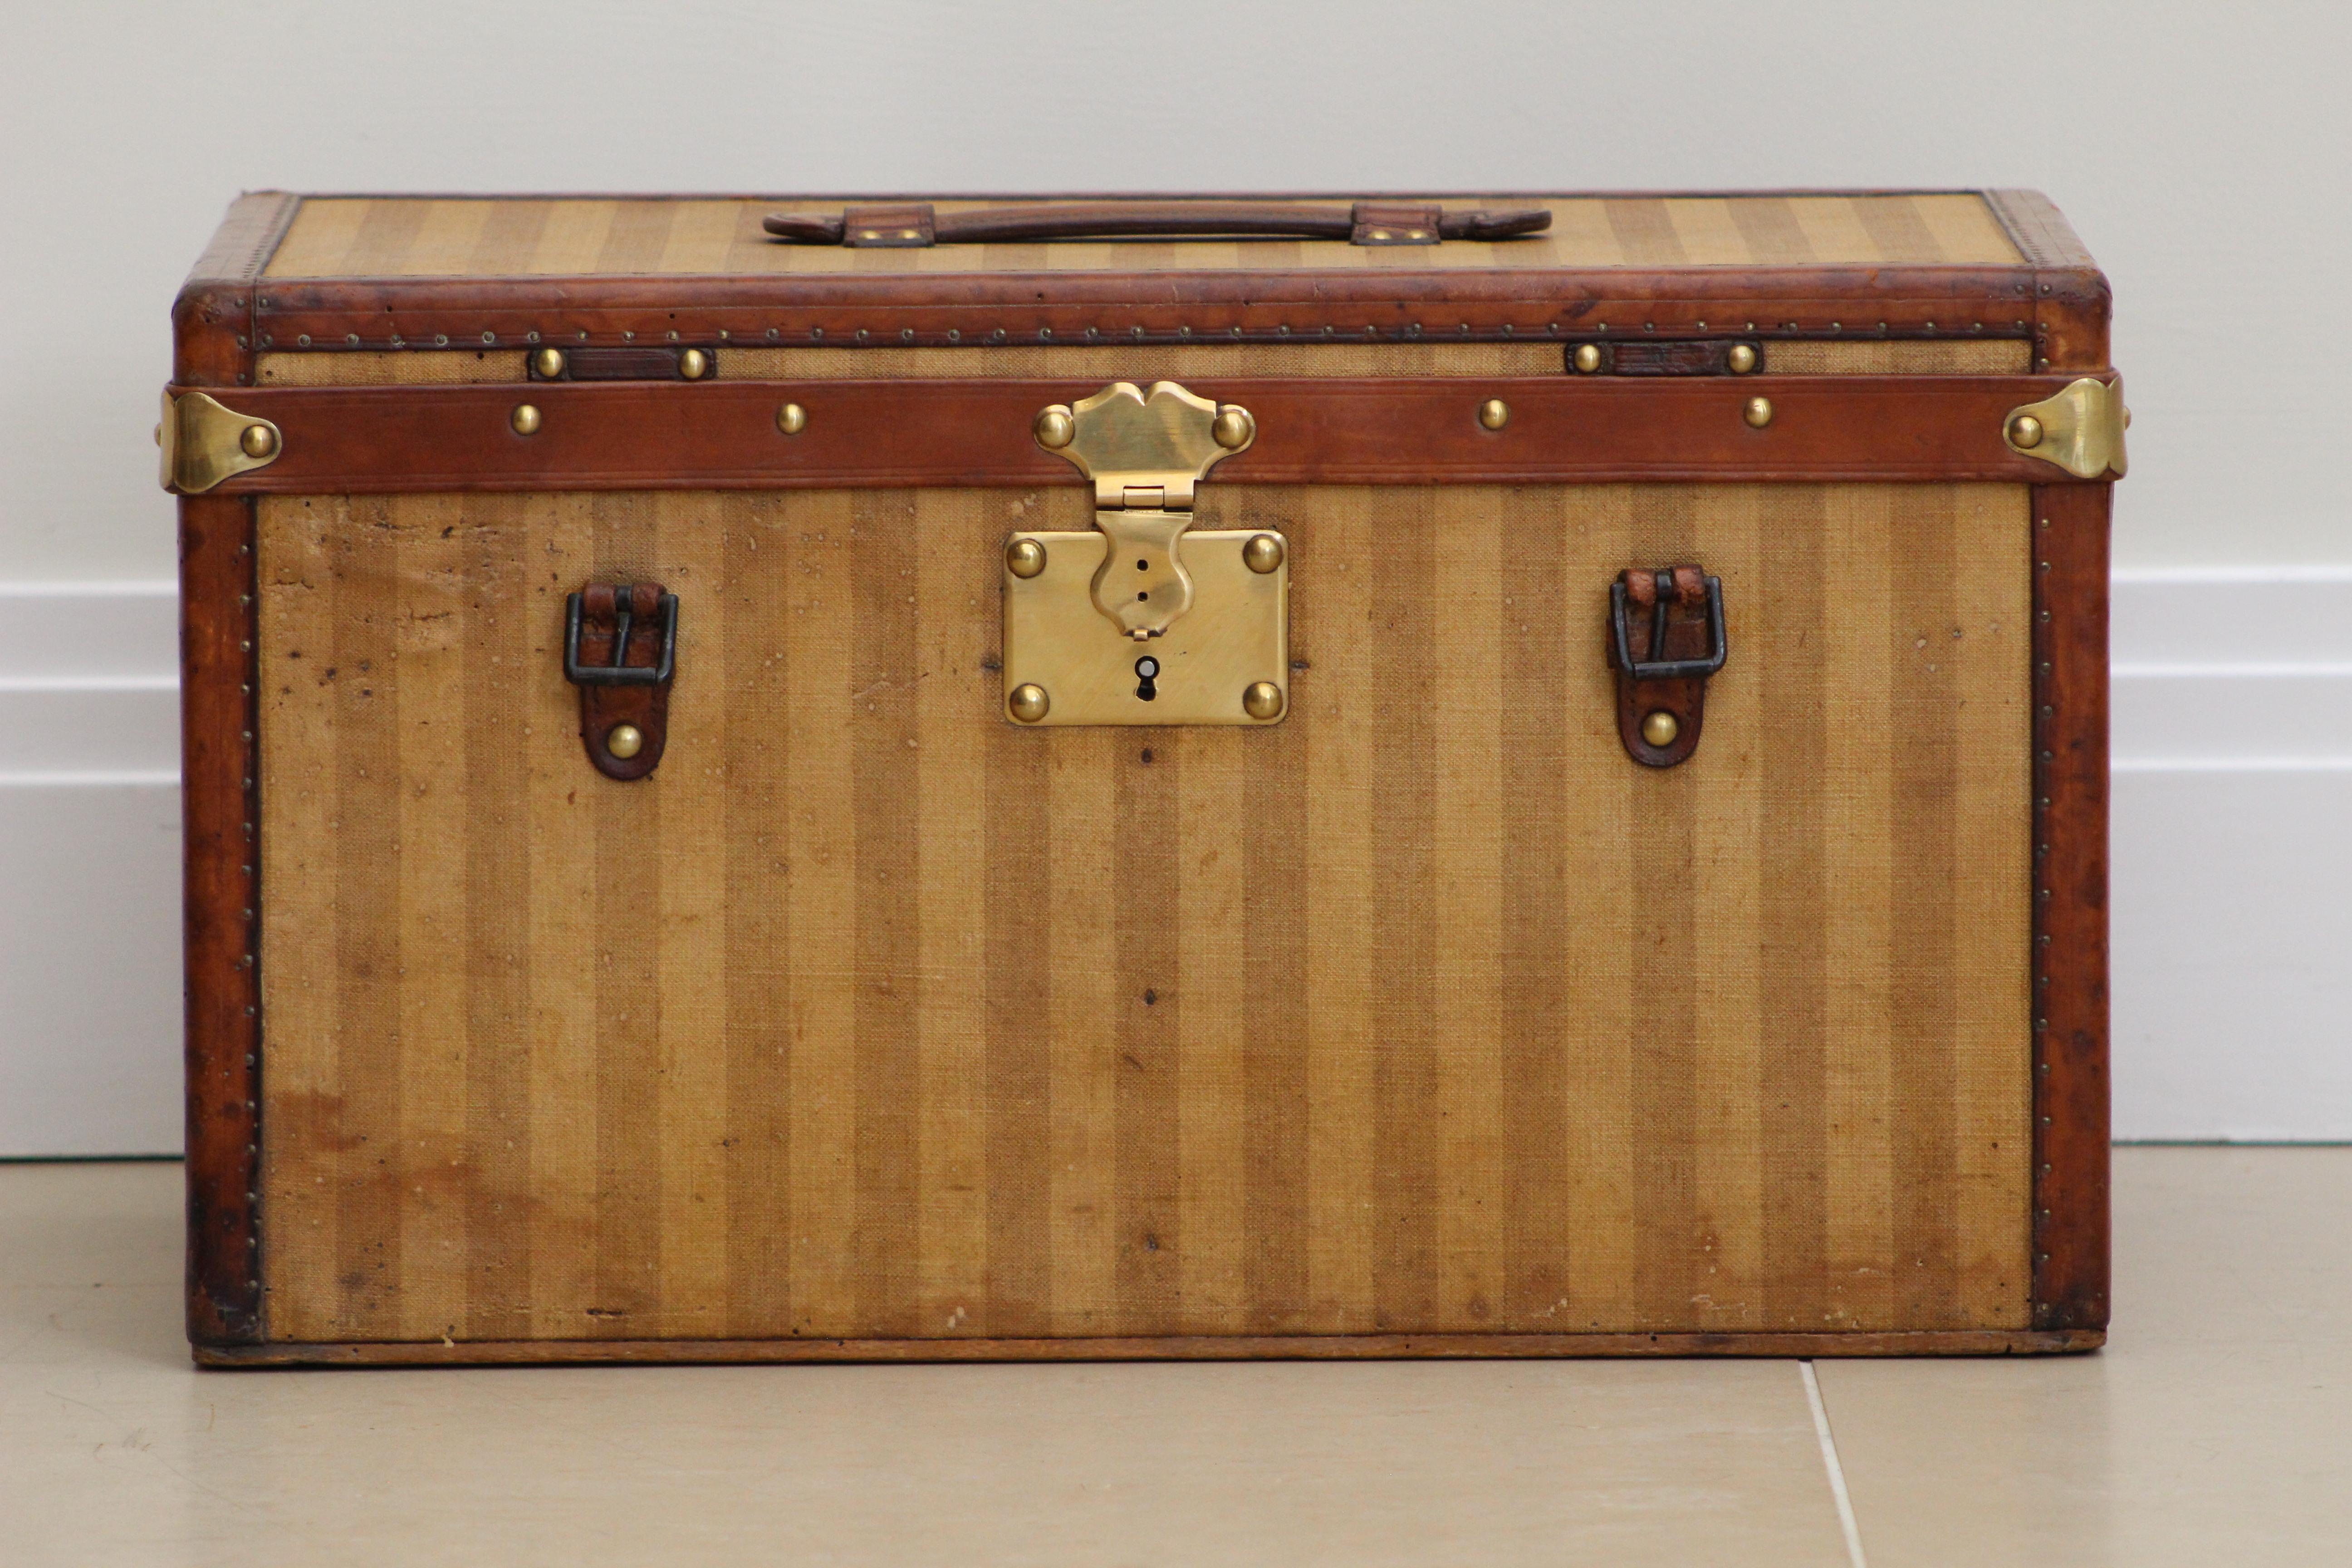 The Louis Vuitton Rayee trunk in question is an unparalleled masterpiece of design and craftsmanship, holding the distinction of being one of only two ever created with its unique features. A tangible embodiment of exclusivity, its counterpart